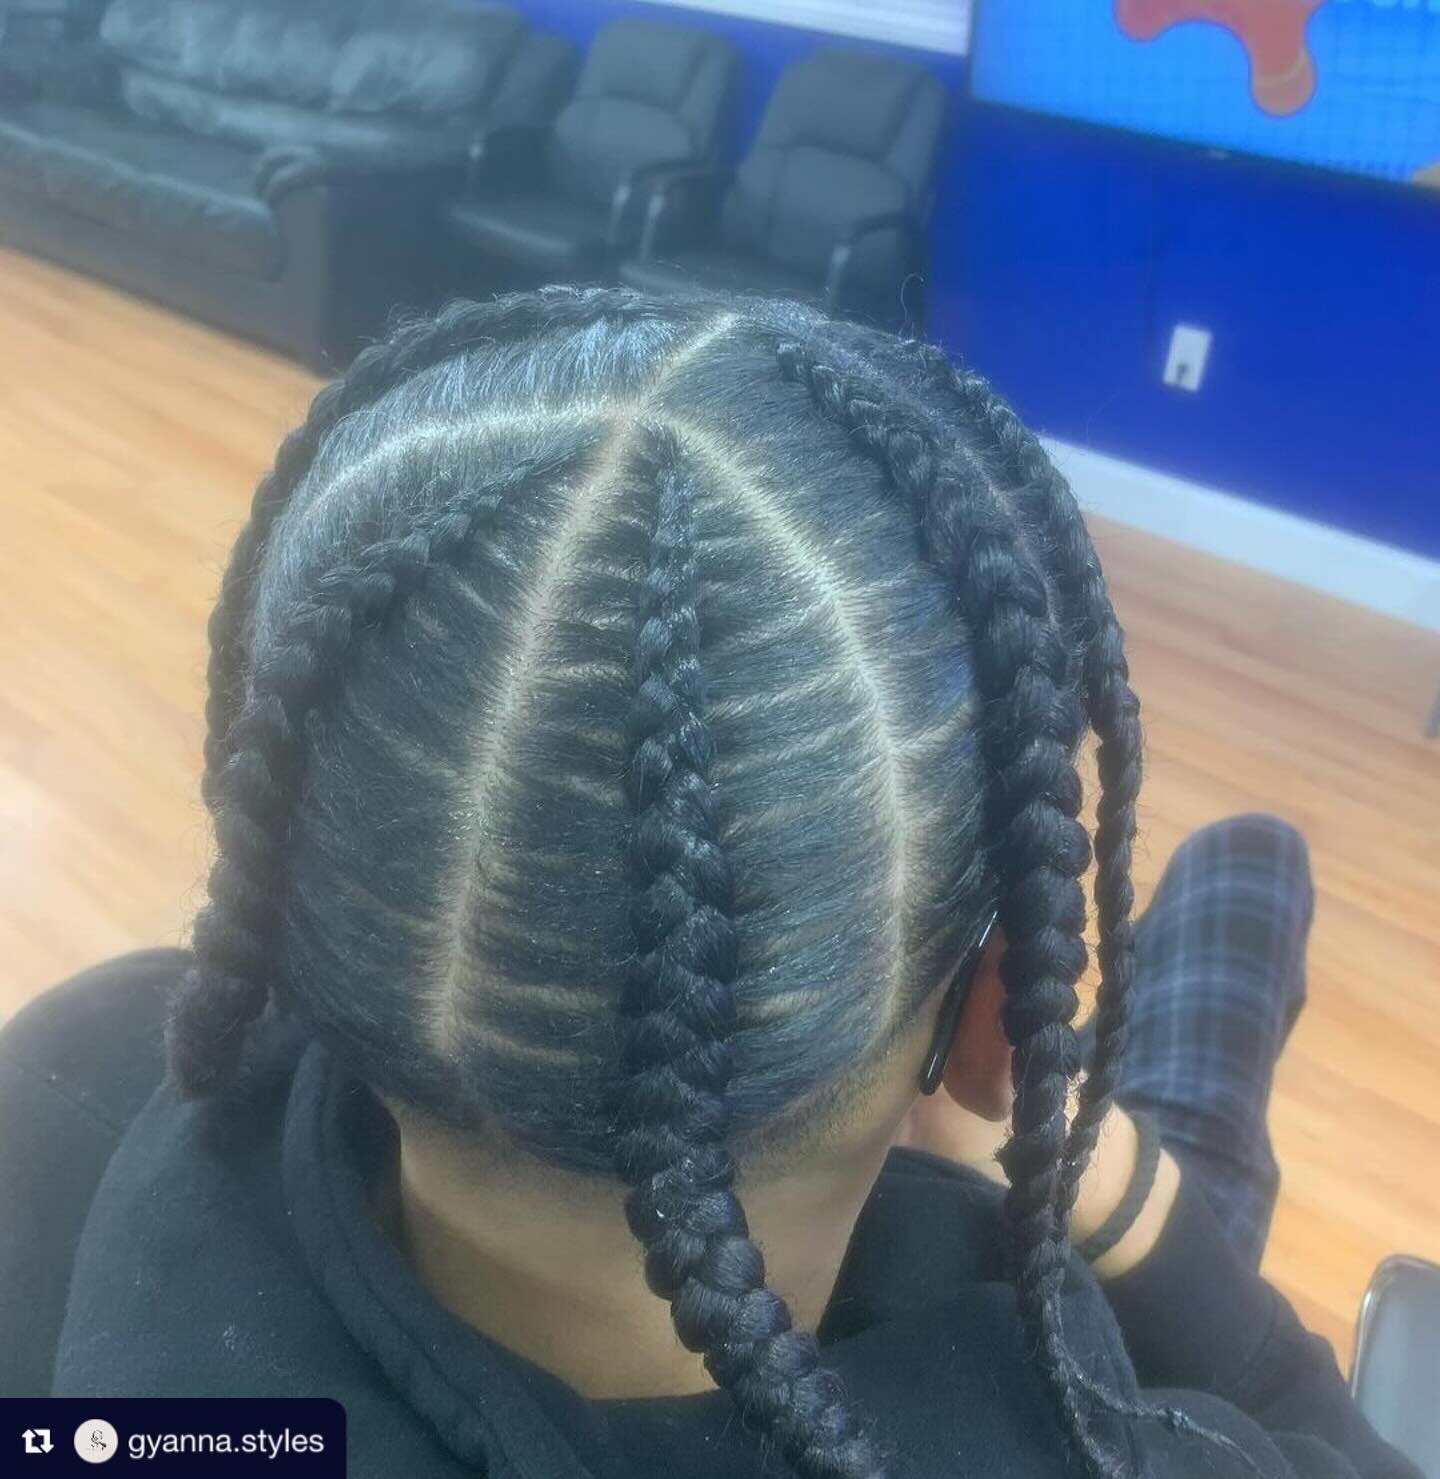 Repost from @gyanna.styles
&bull;
I really need to fix my camera😂 But ive been doing my thang lately and yall cant tell me different🤣 

Book pop smoke braids today, spots fill up quick so get to it🙃 At Blendz Barbershop💈

Why haven&rsquo;t you bo